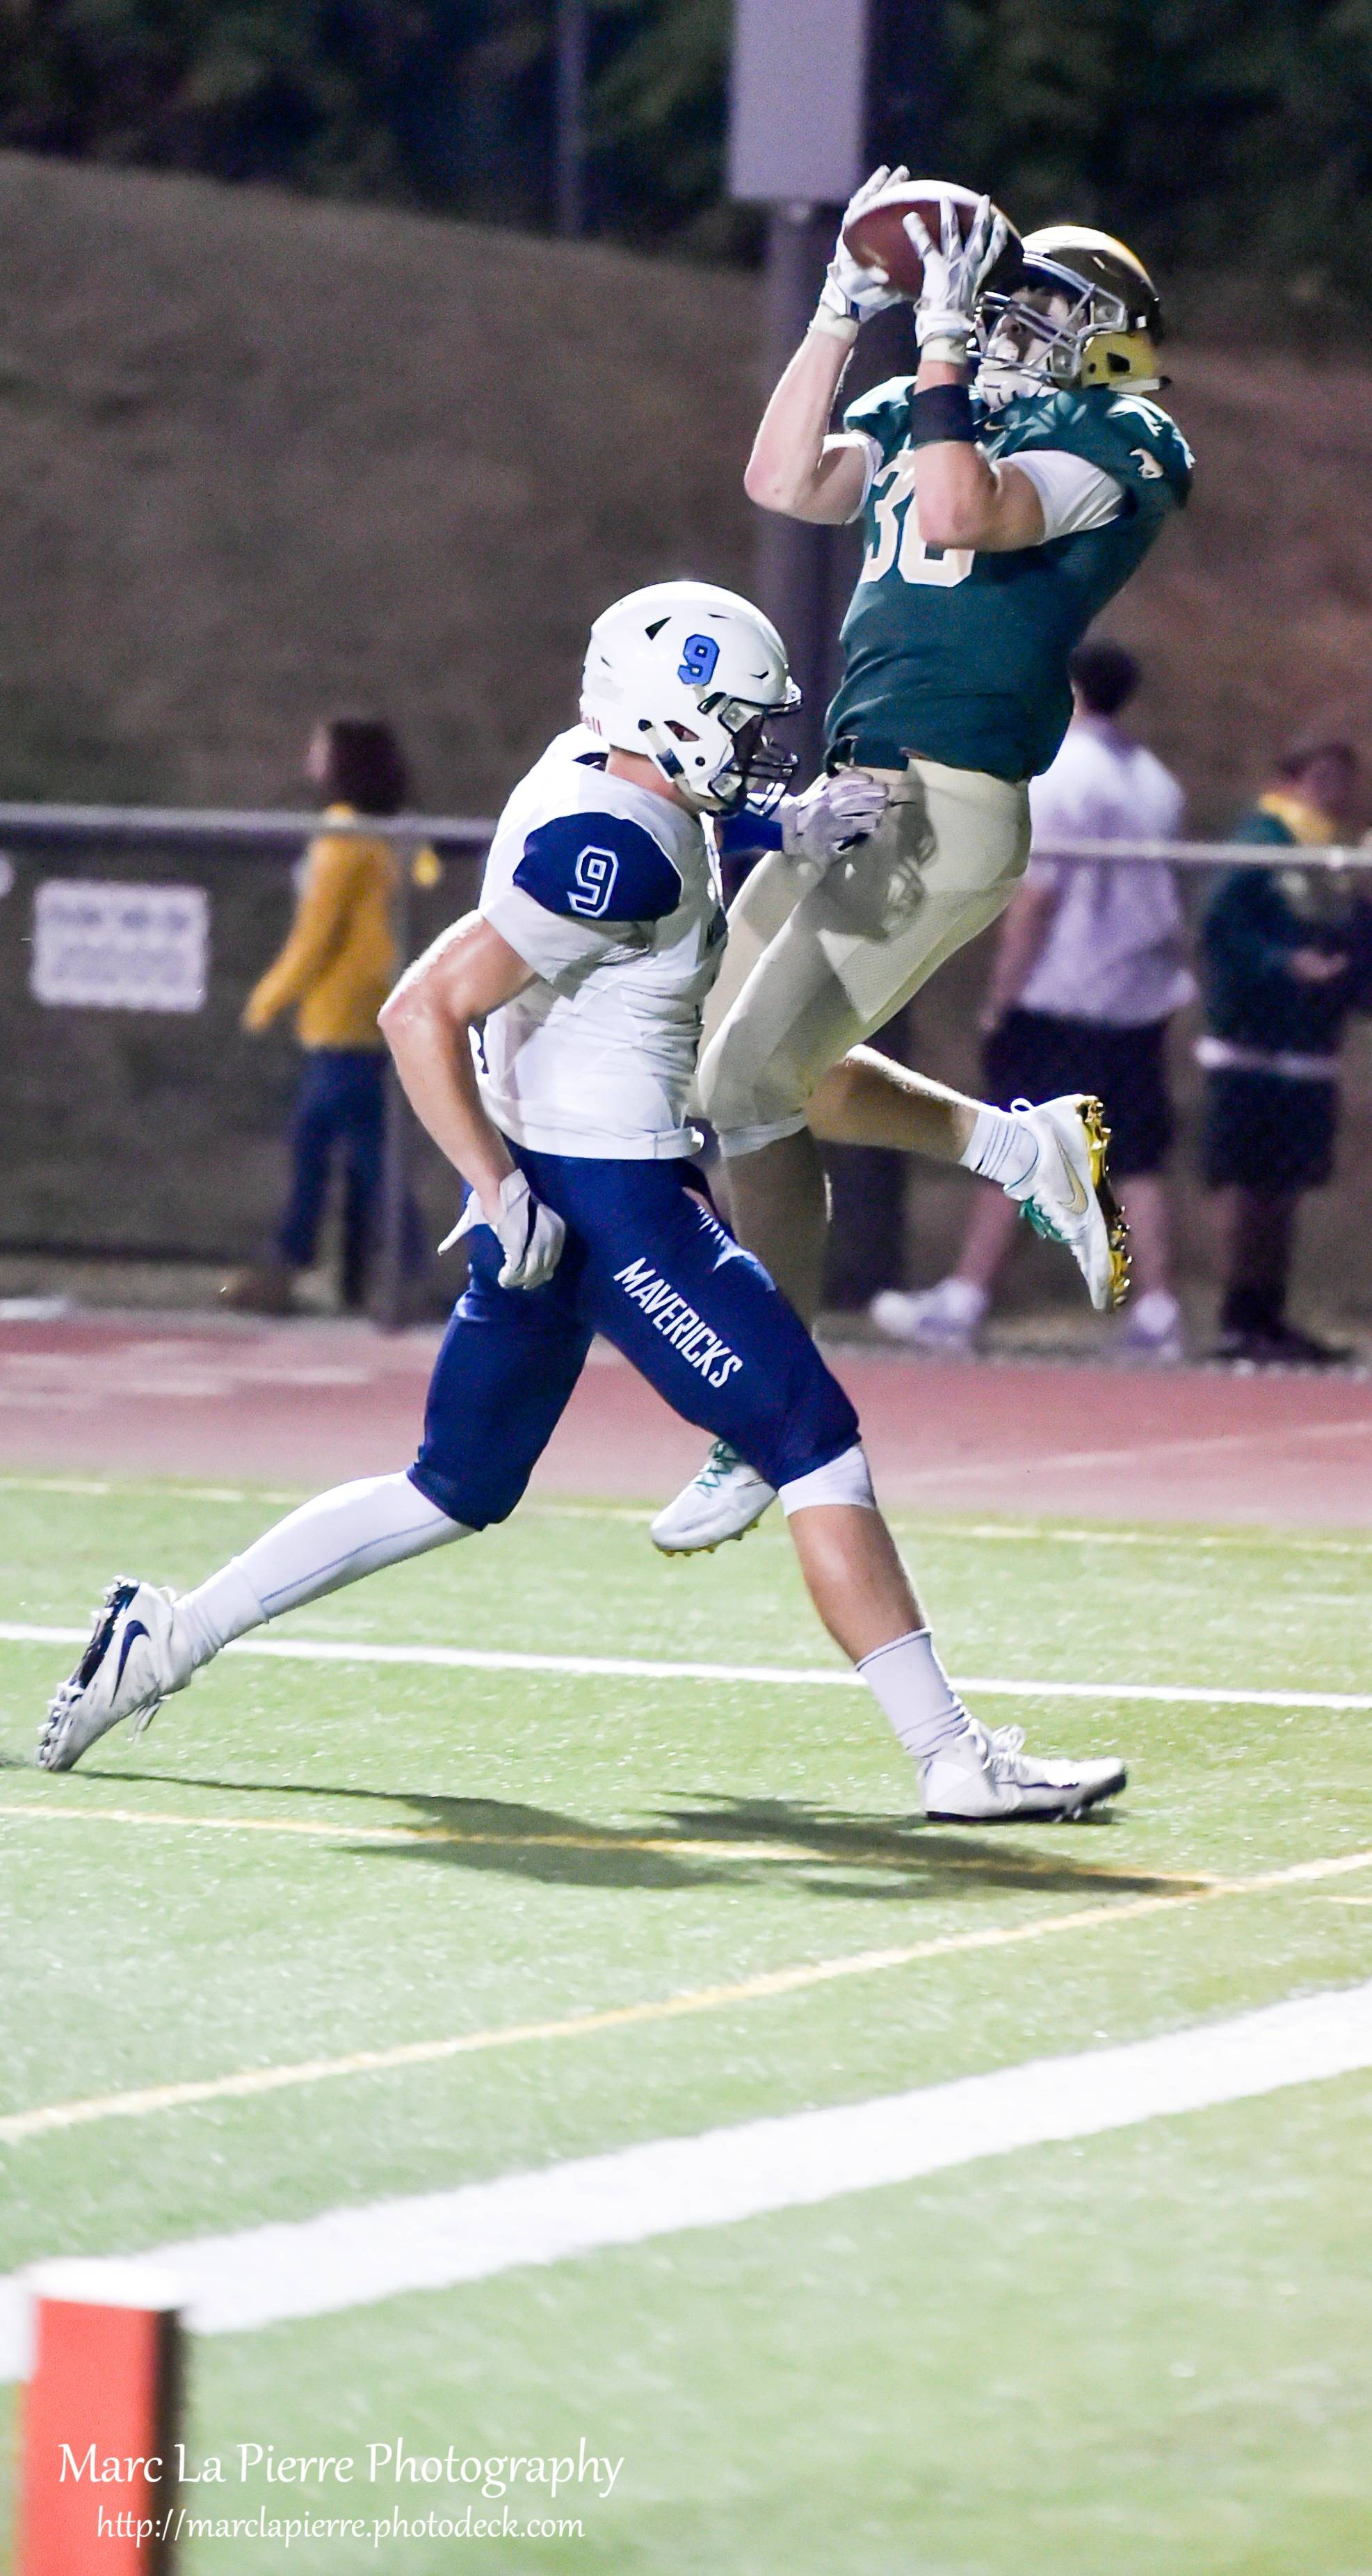 Redmond’s Carson Bruener hauls in a touchdown pass on Friday. Courtesy of Marc La Pierre Photography http://marclapierre.photodeck.com/